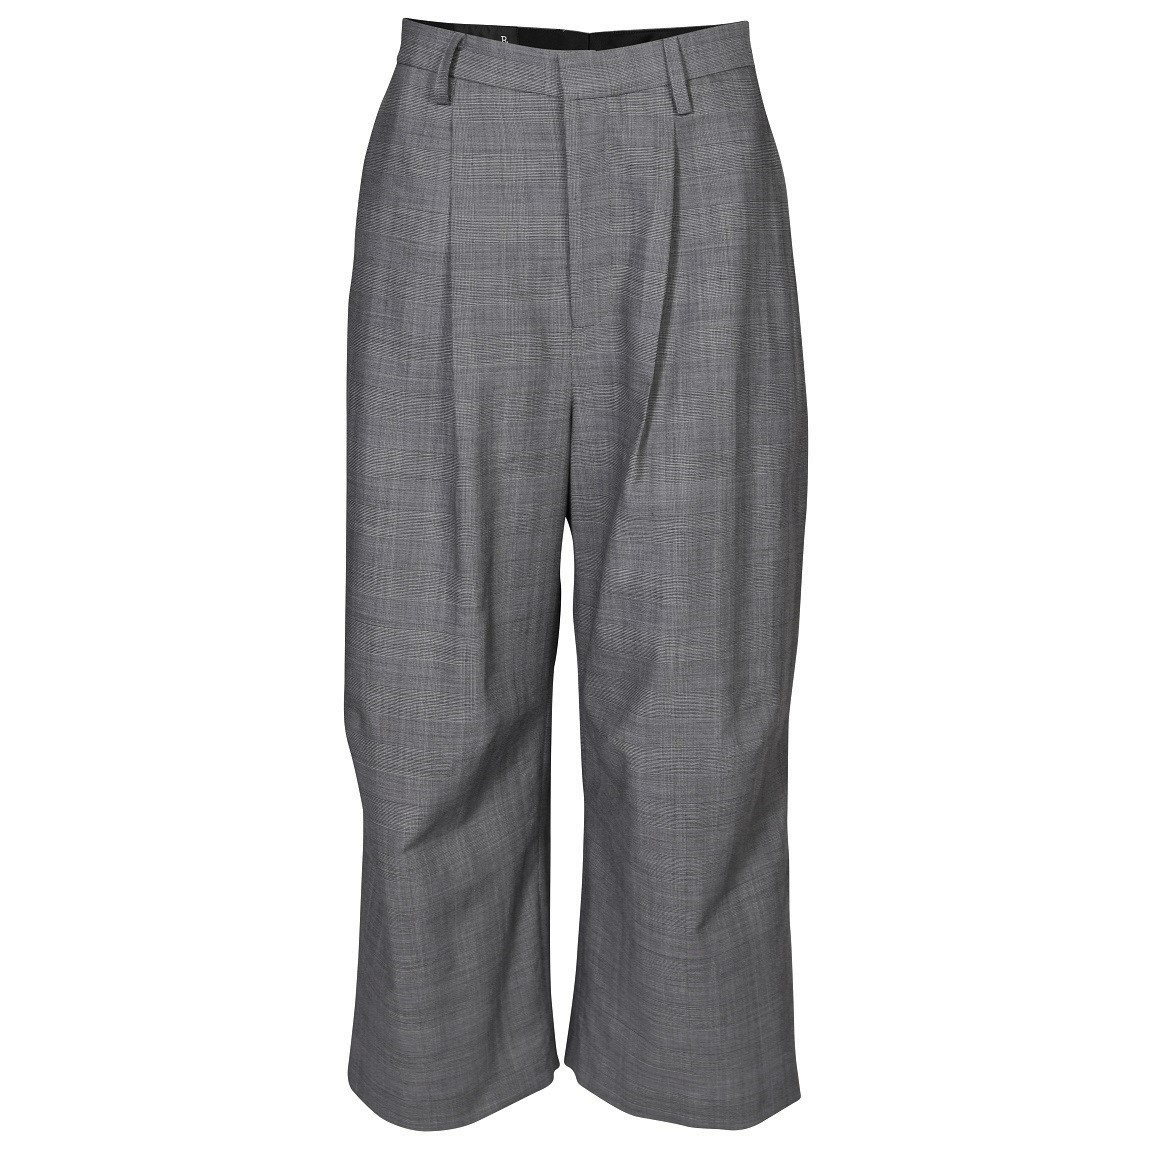 R13 Articulated Knee Trouser Grey Plaid 29